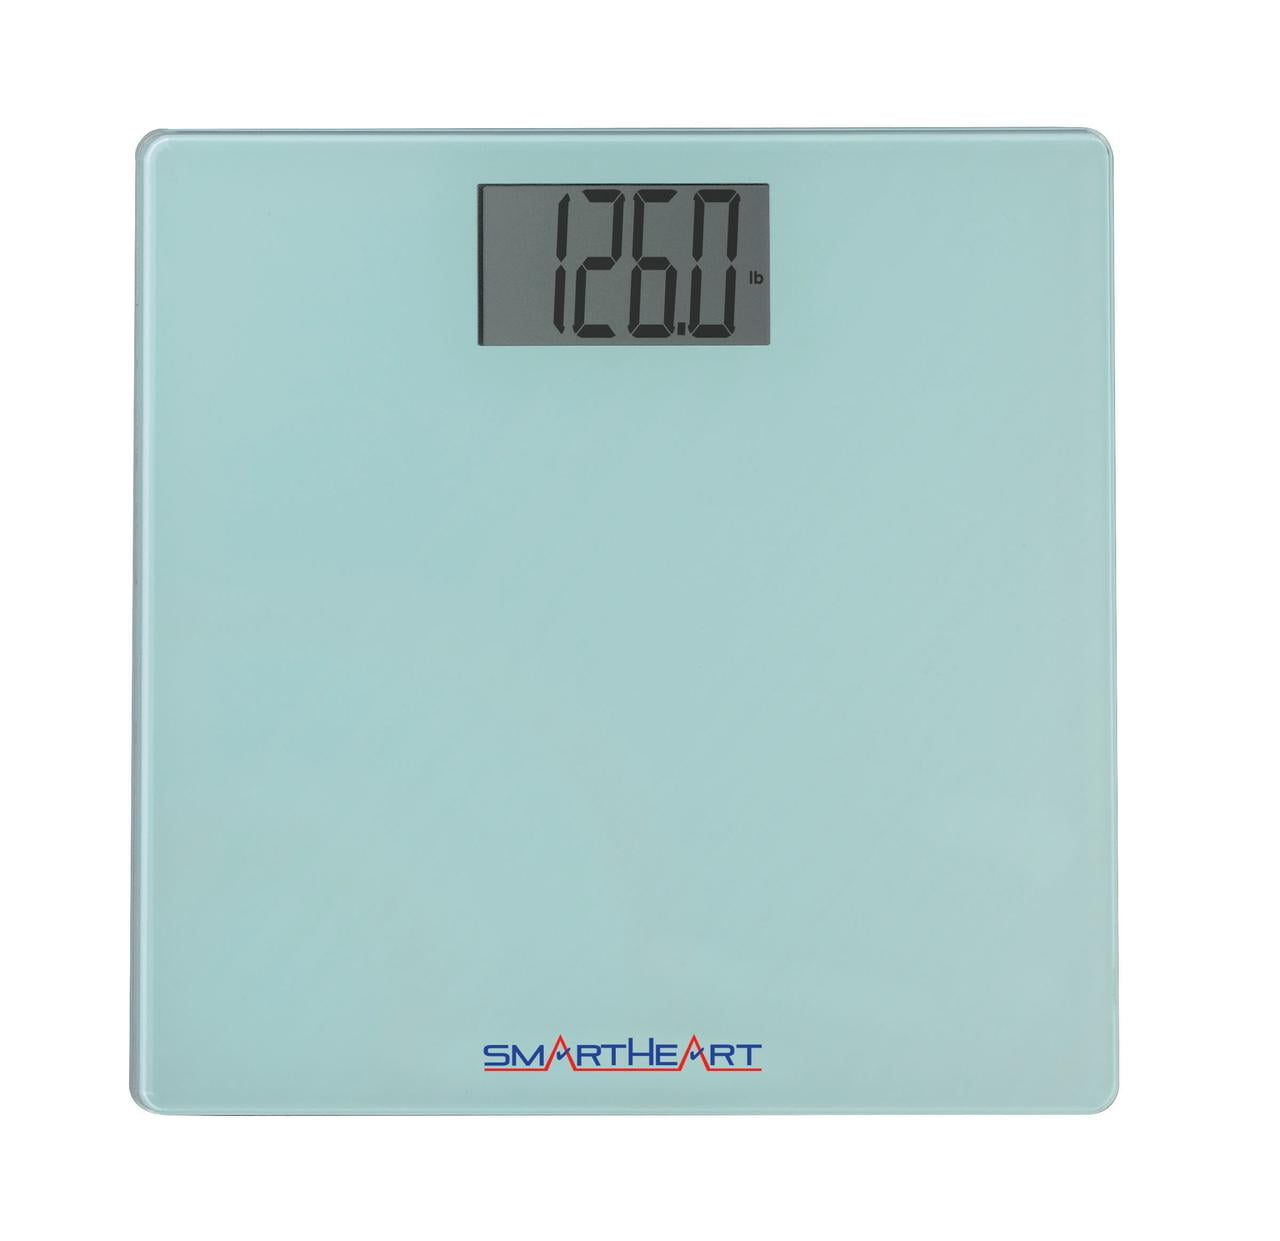 KUBEI Upgraded Larger Size Digital Food Scale Weight Grams and OZ, 5kg/0.1g  Kitchen Scales for Cooking Baking, High Precision